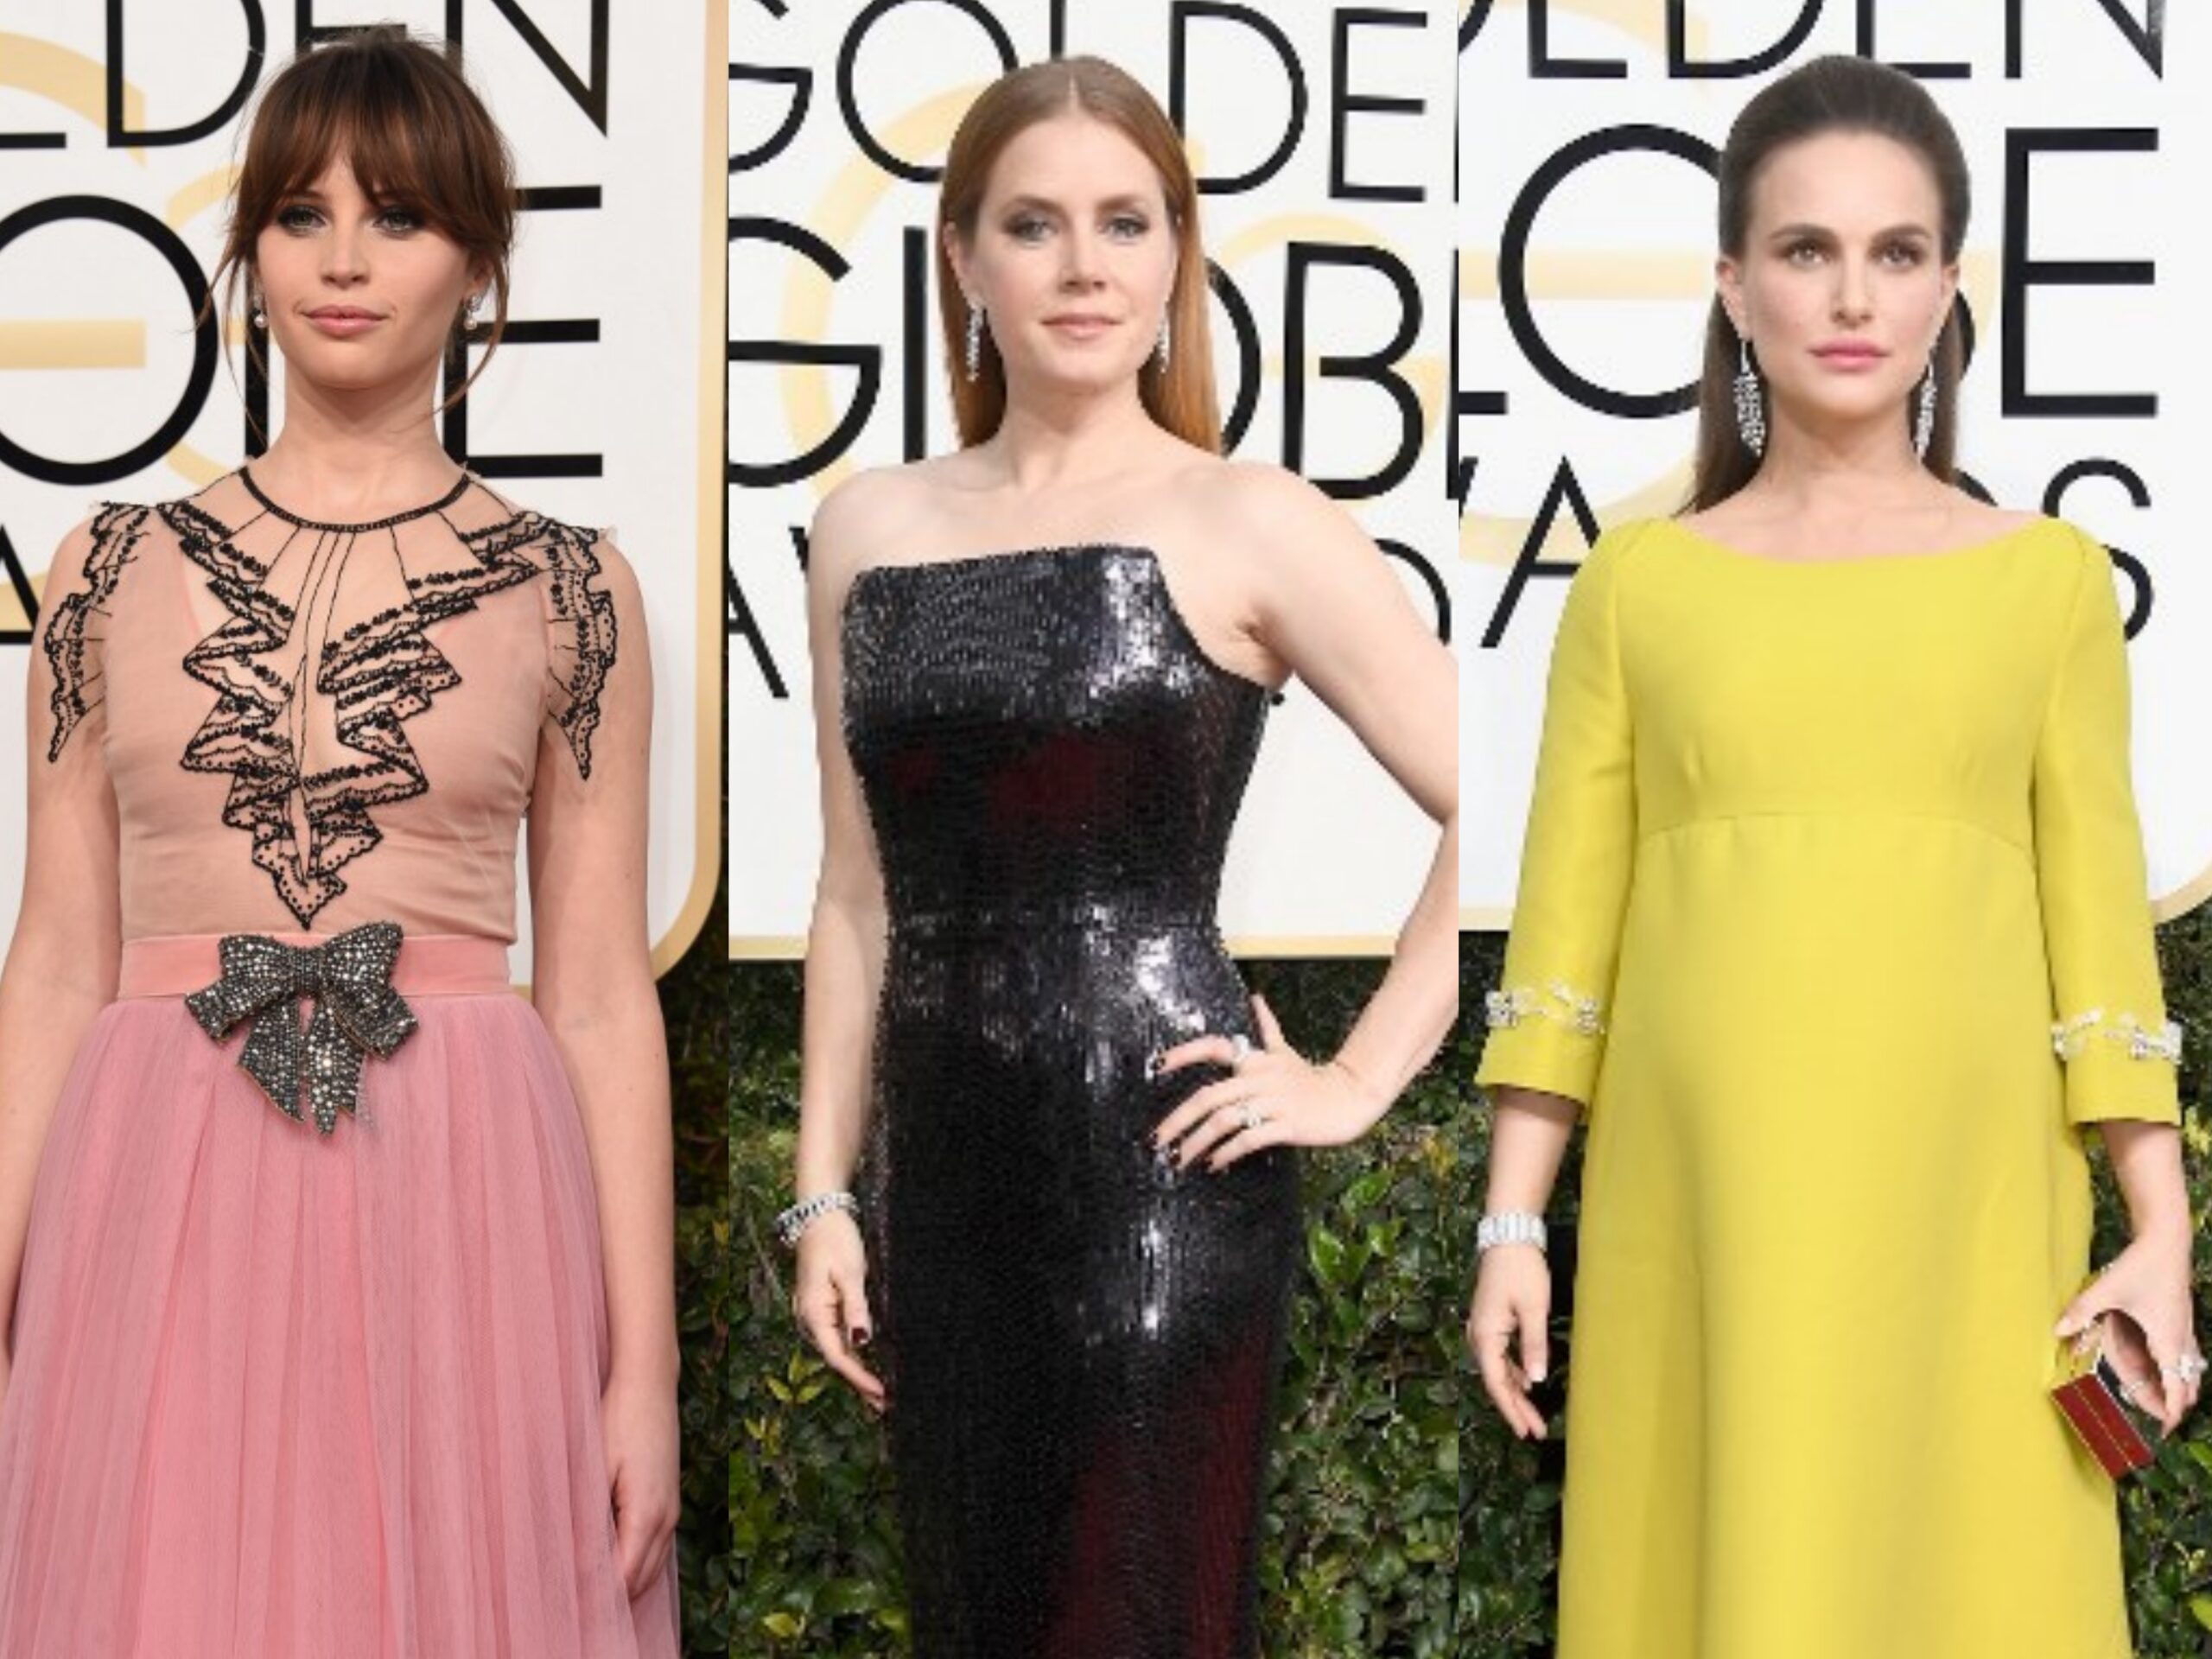 IN PHOTOS: Red carpet at Golden Globes 2017